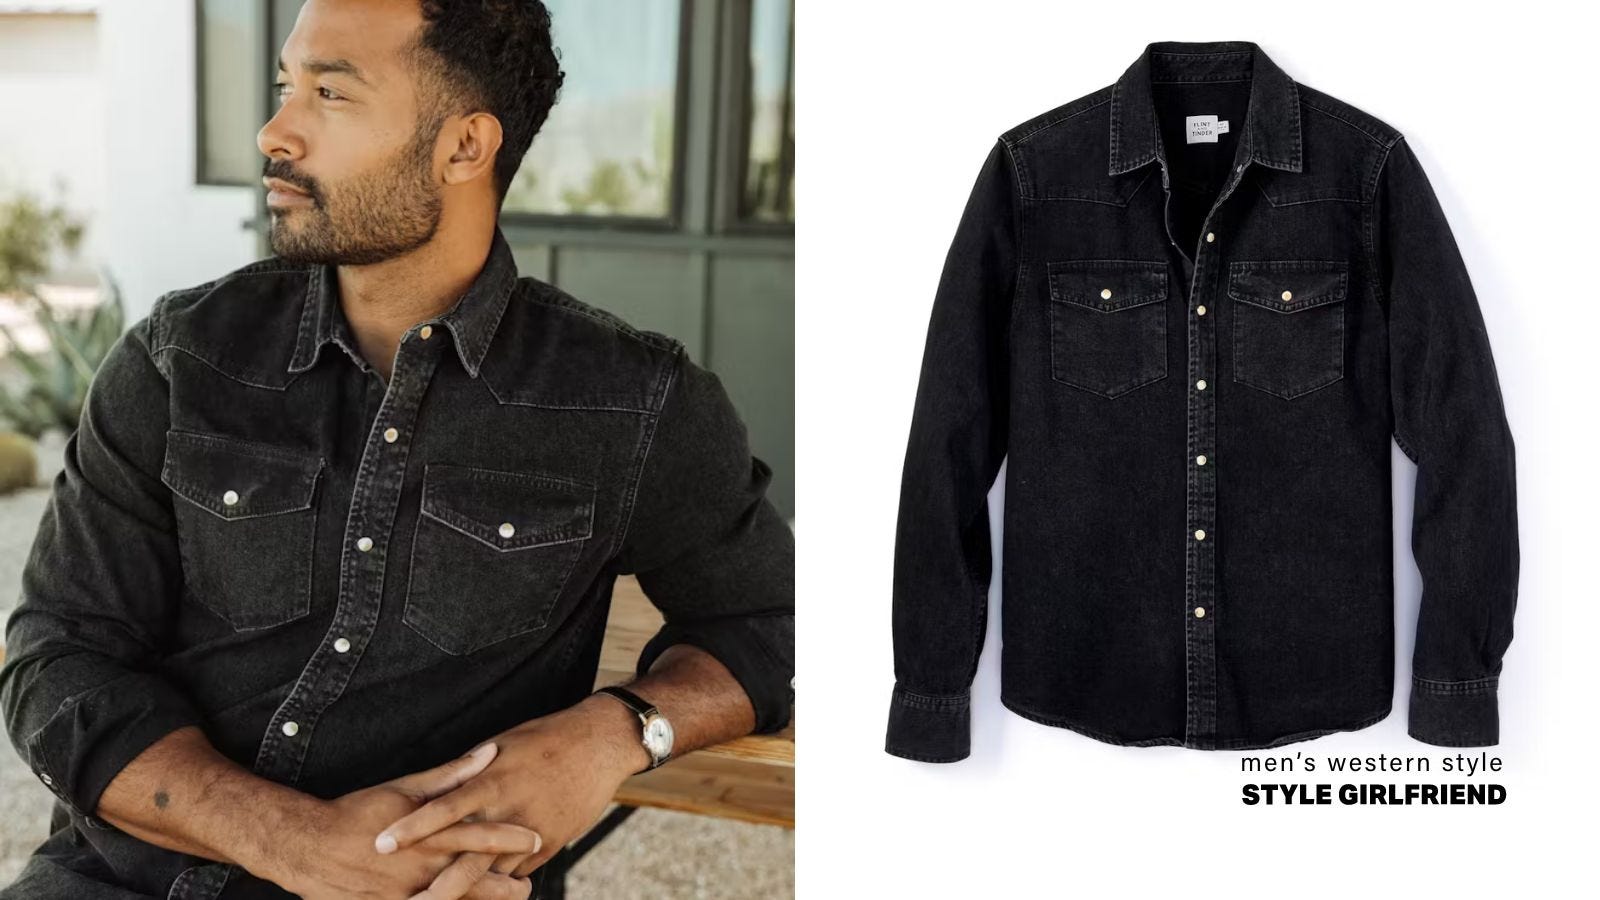 side by side images: on the left, a close-up of a man wearing a black snap-button western shirt, on the right: that same shirt in a product flat lay image